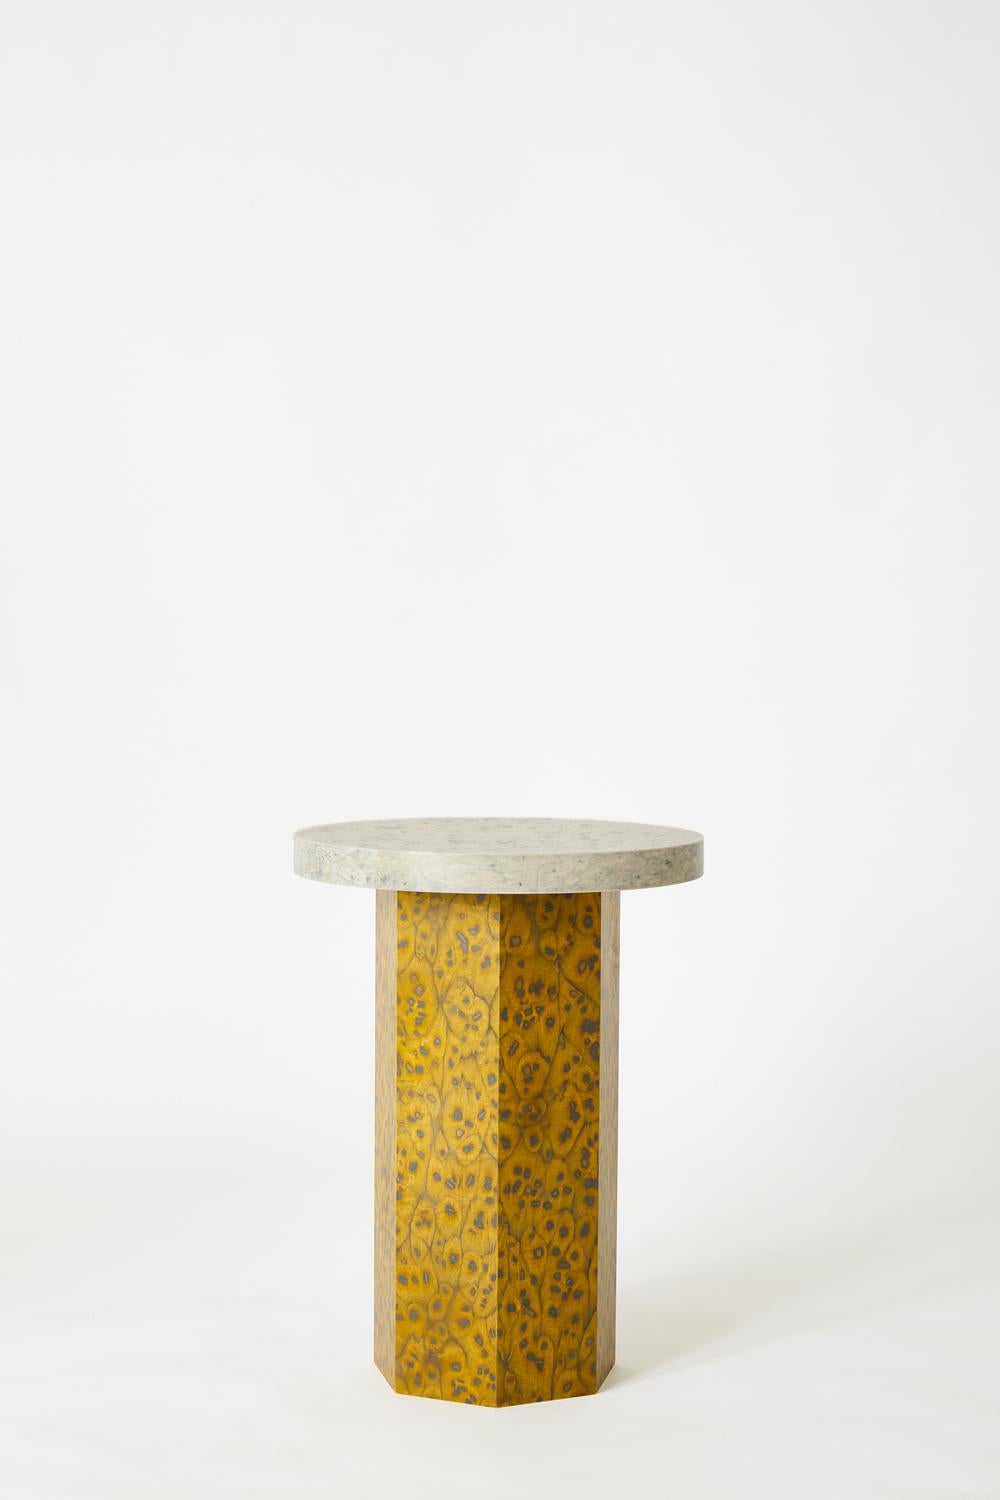 Round Bold Osis Septagon base side table by Llot Llov
Dimensions: Ø 40 x H 54
Materials: core board birch
Also available in round slim, rectangle slim, rectangle bold.

With OSIS Edition 5 LLOT LLOV is deepening the understanding of the impact of